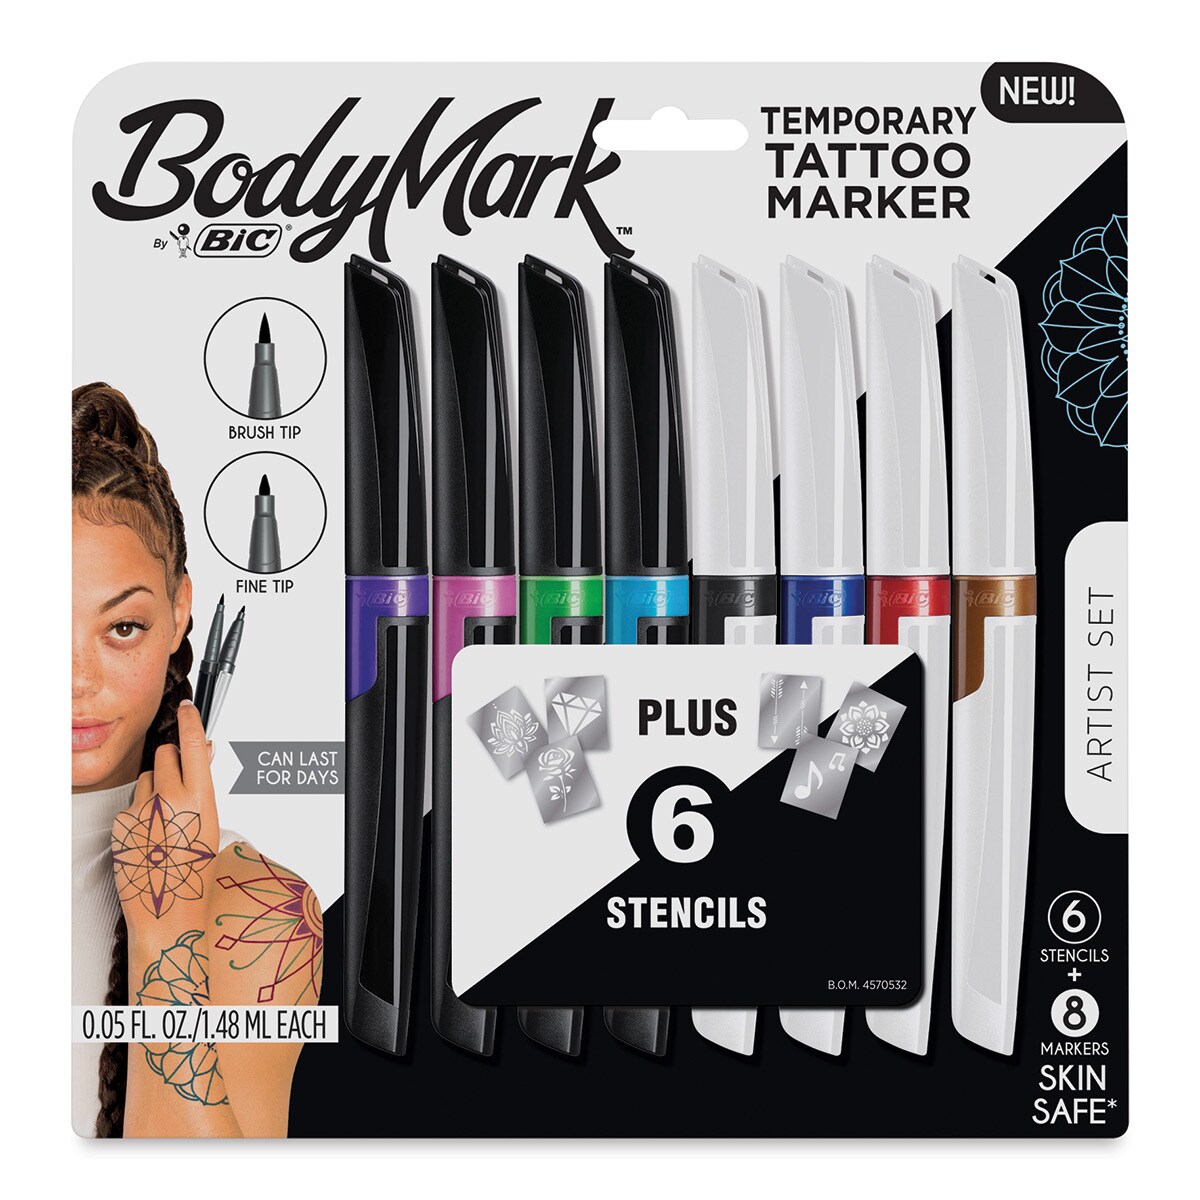 Bic BodyMark Mixed Tip Temporary Tattoo Markers - Set of 8, Assorted Colors